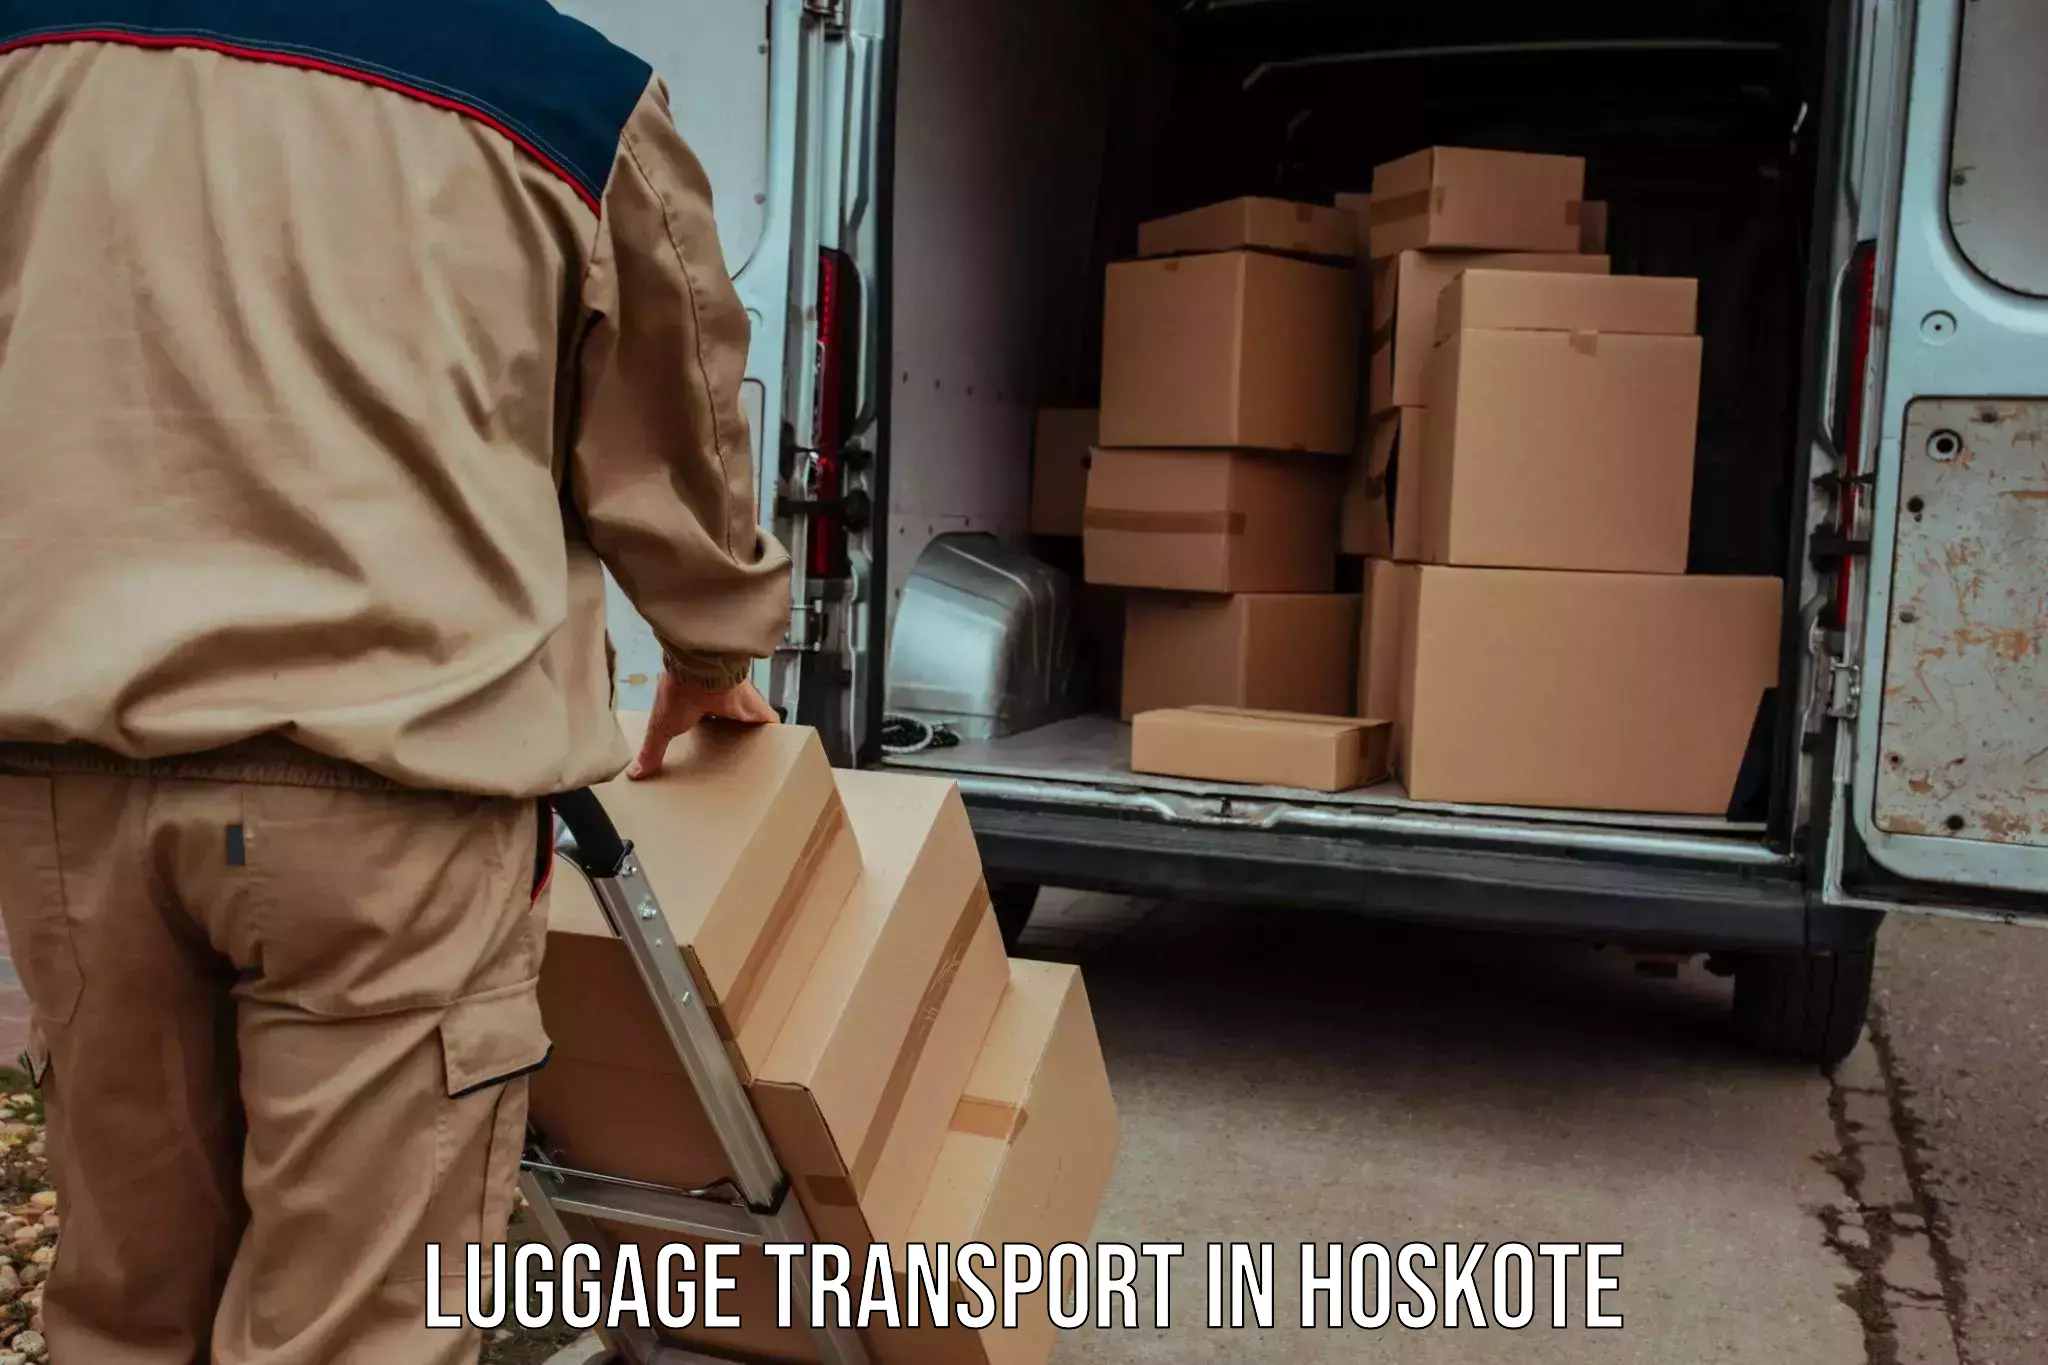 Holiday season luggage delivery in Hoskote